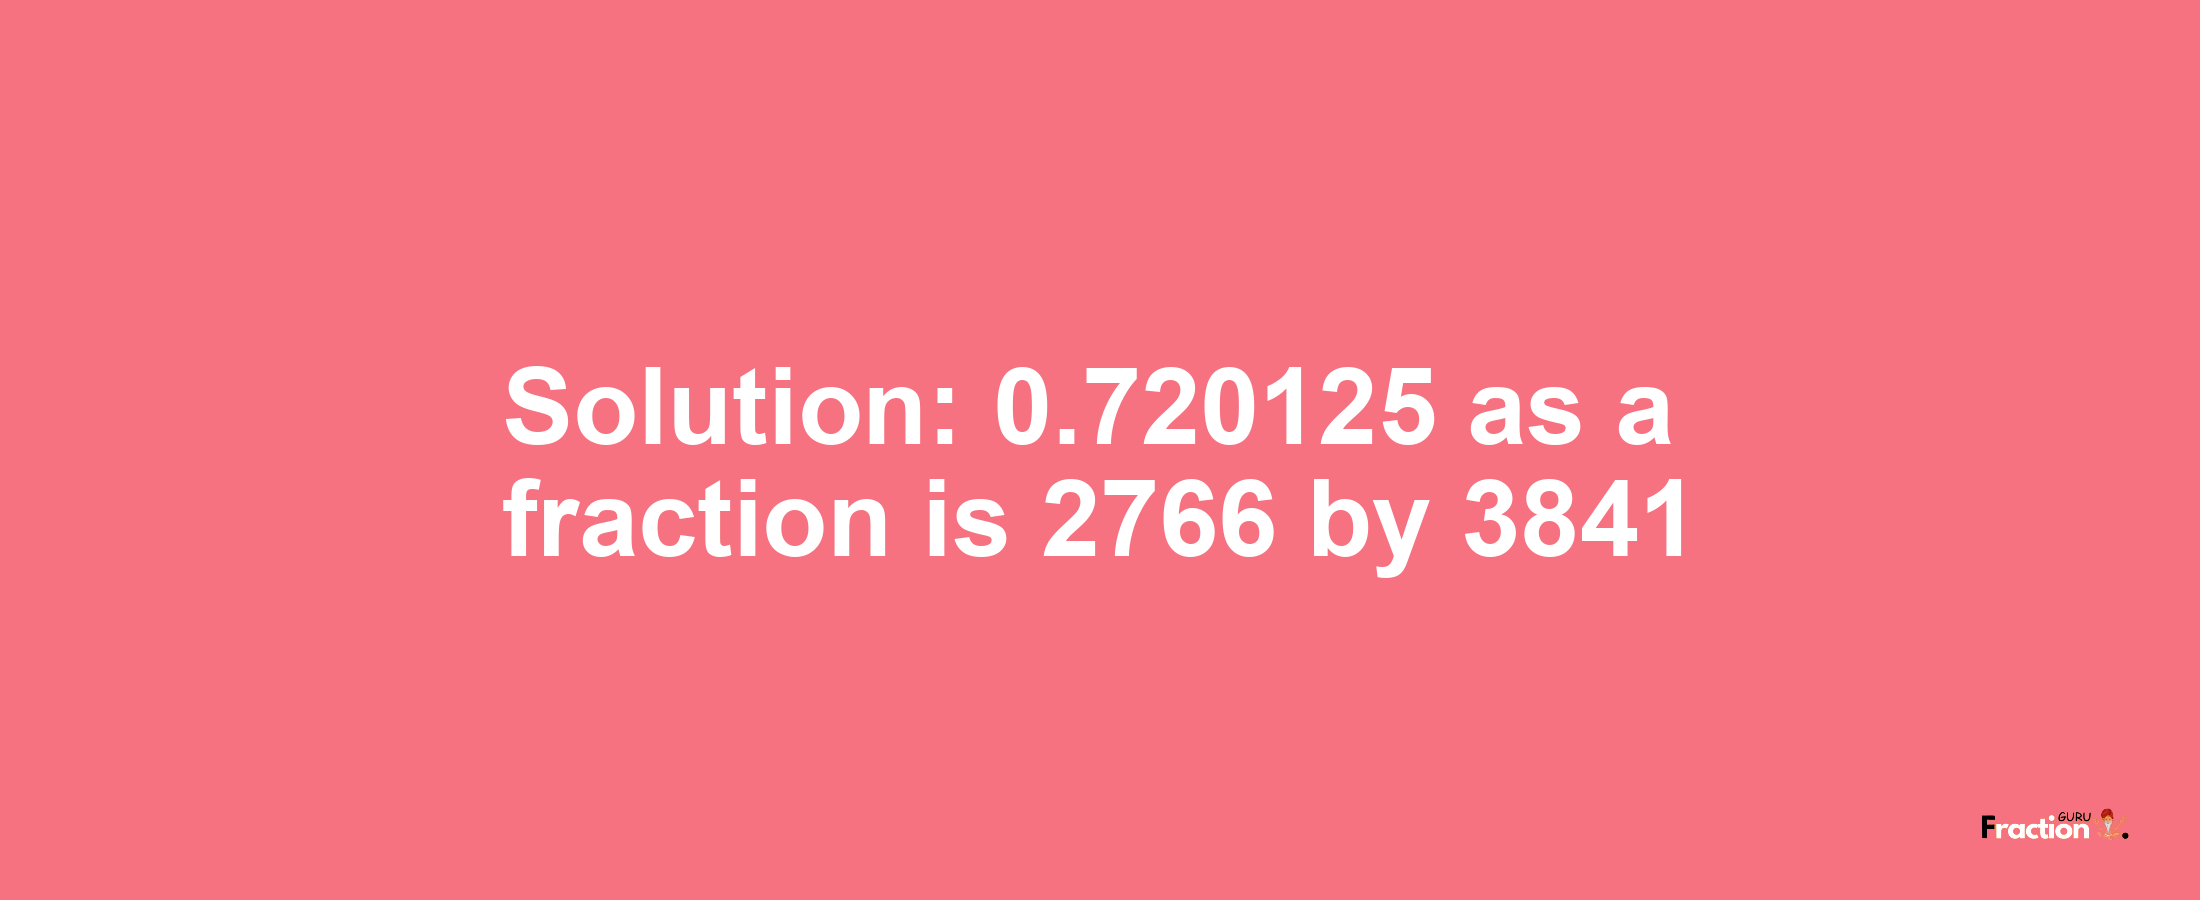 Solution:0.720125 as a fraction is 2766/3841